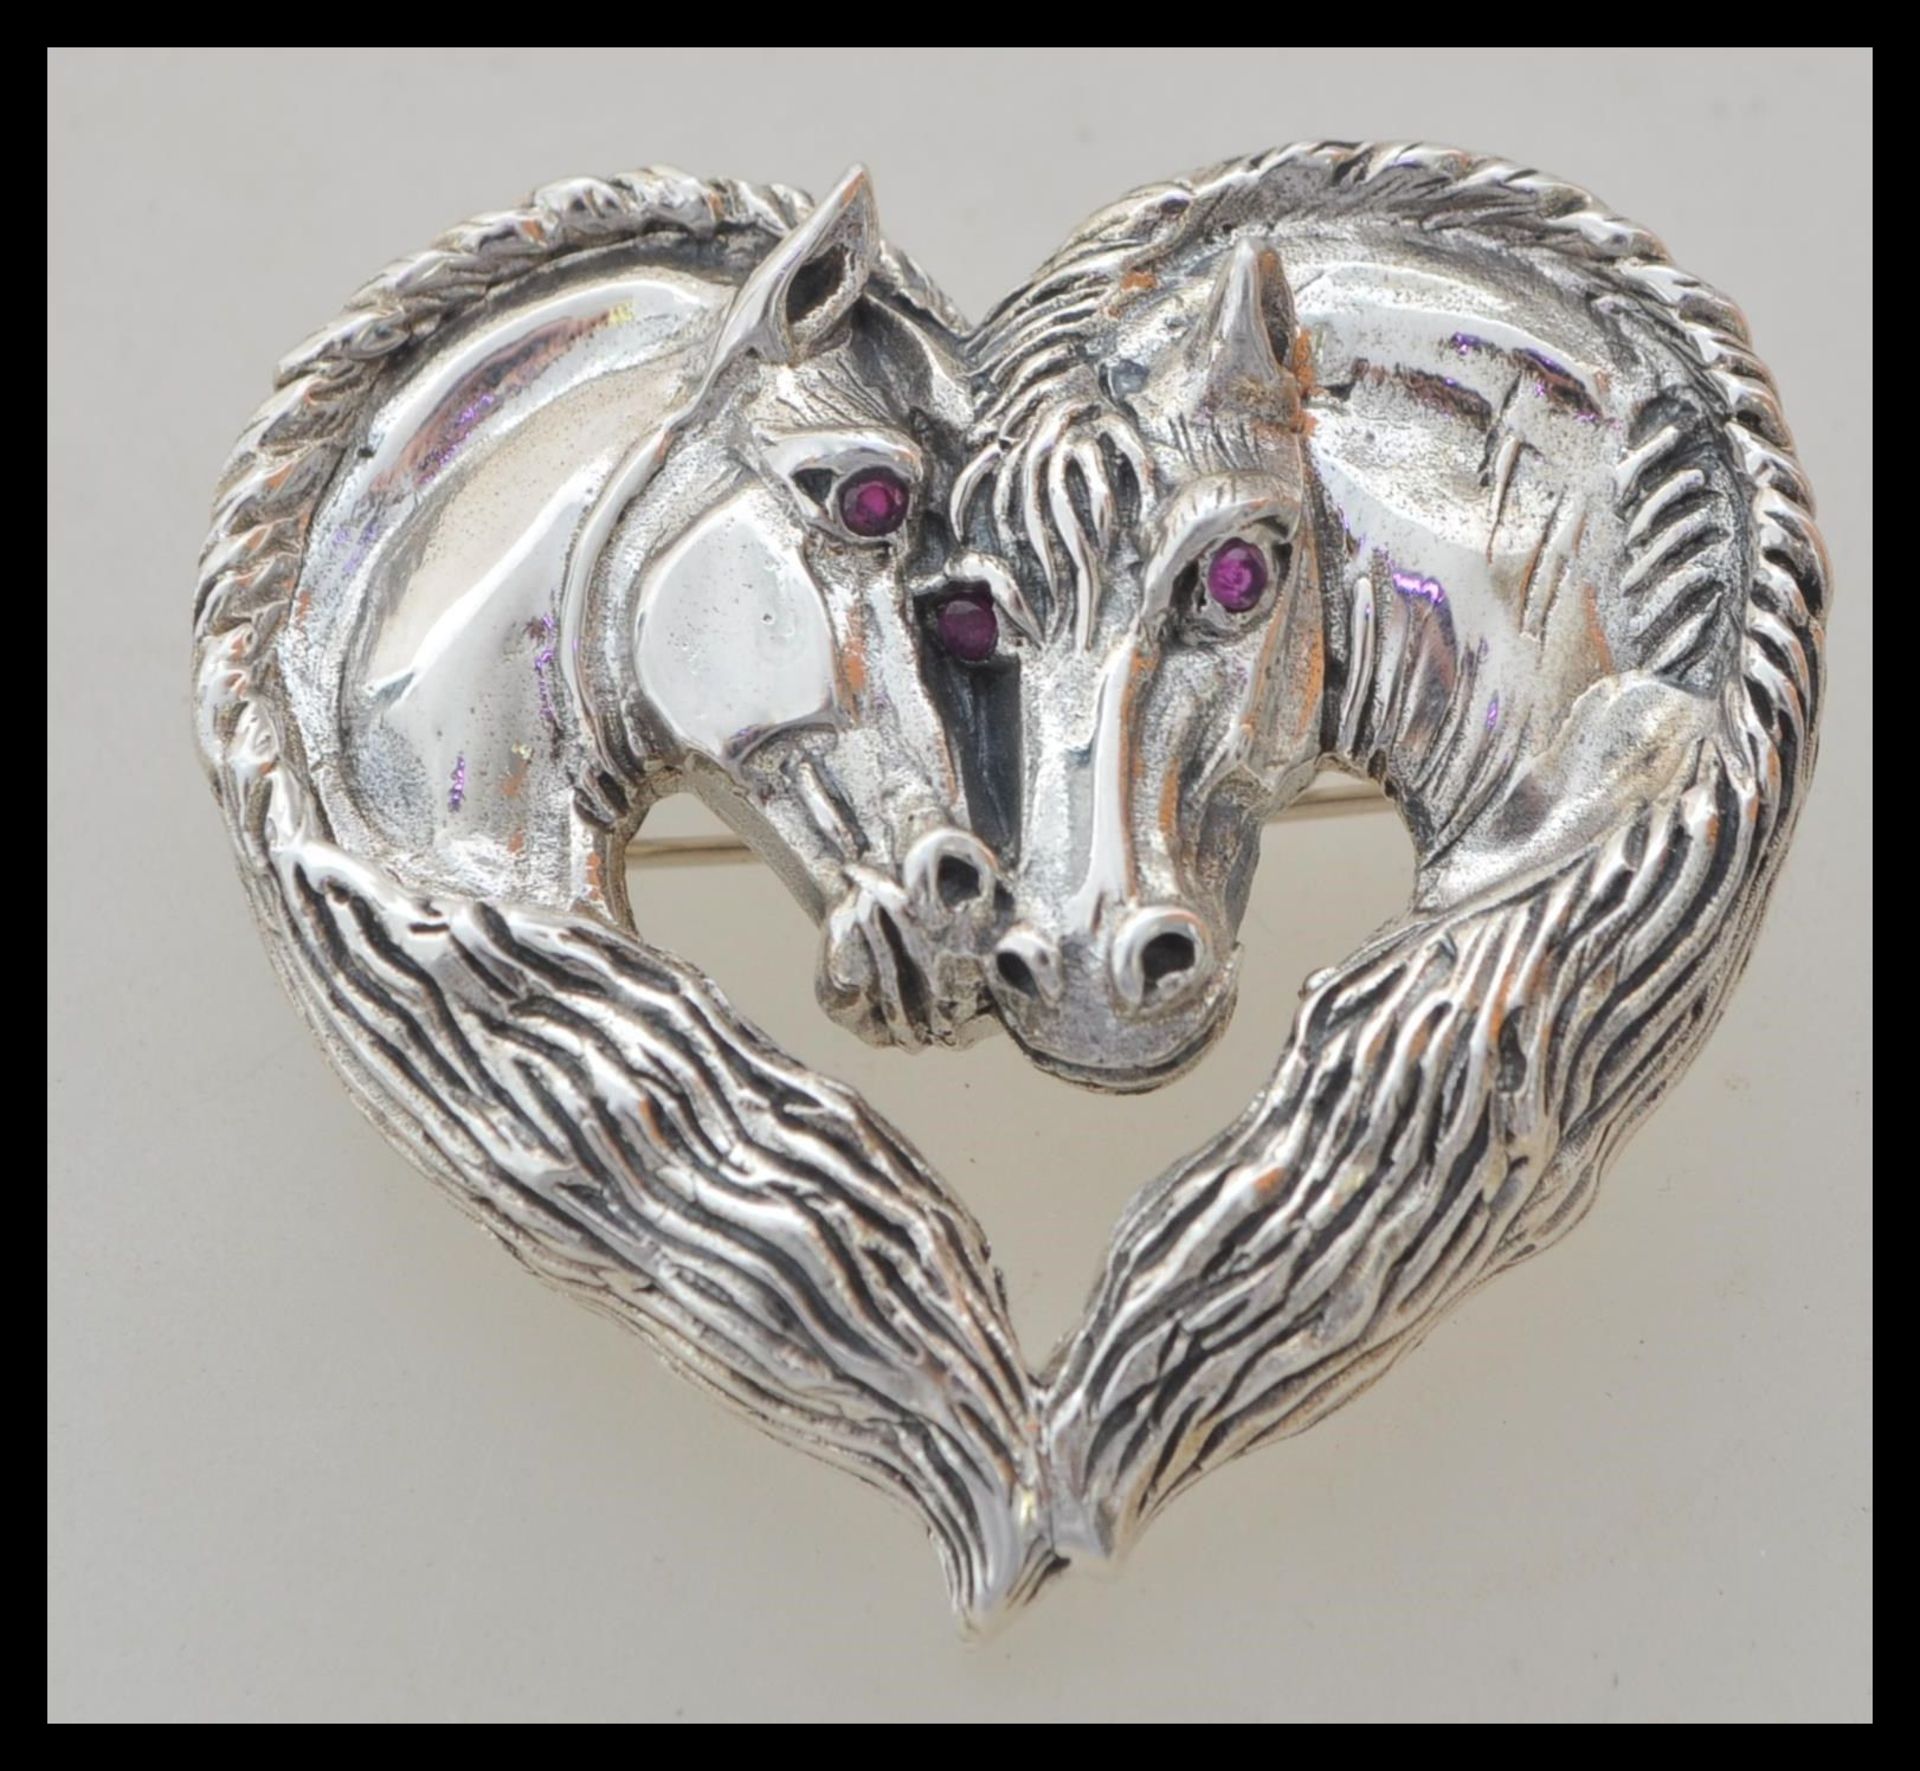 A stamped 925 silver heart brooch in the form of two horses having red stone eyes. Weight 19.1g.